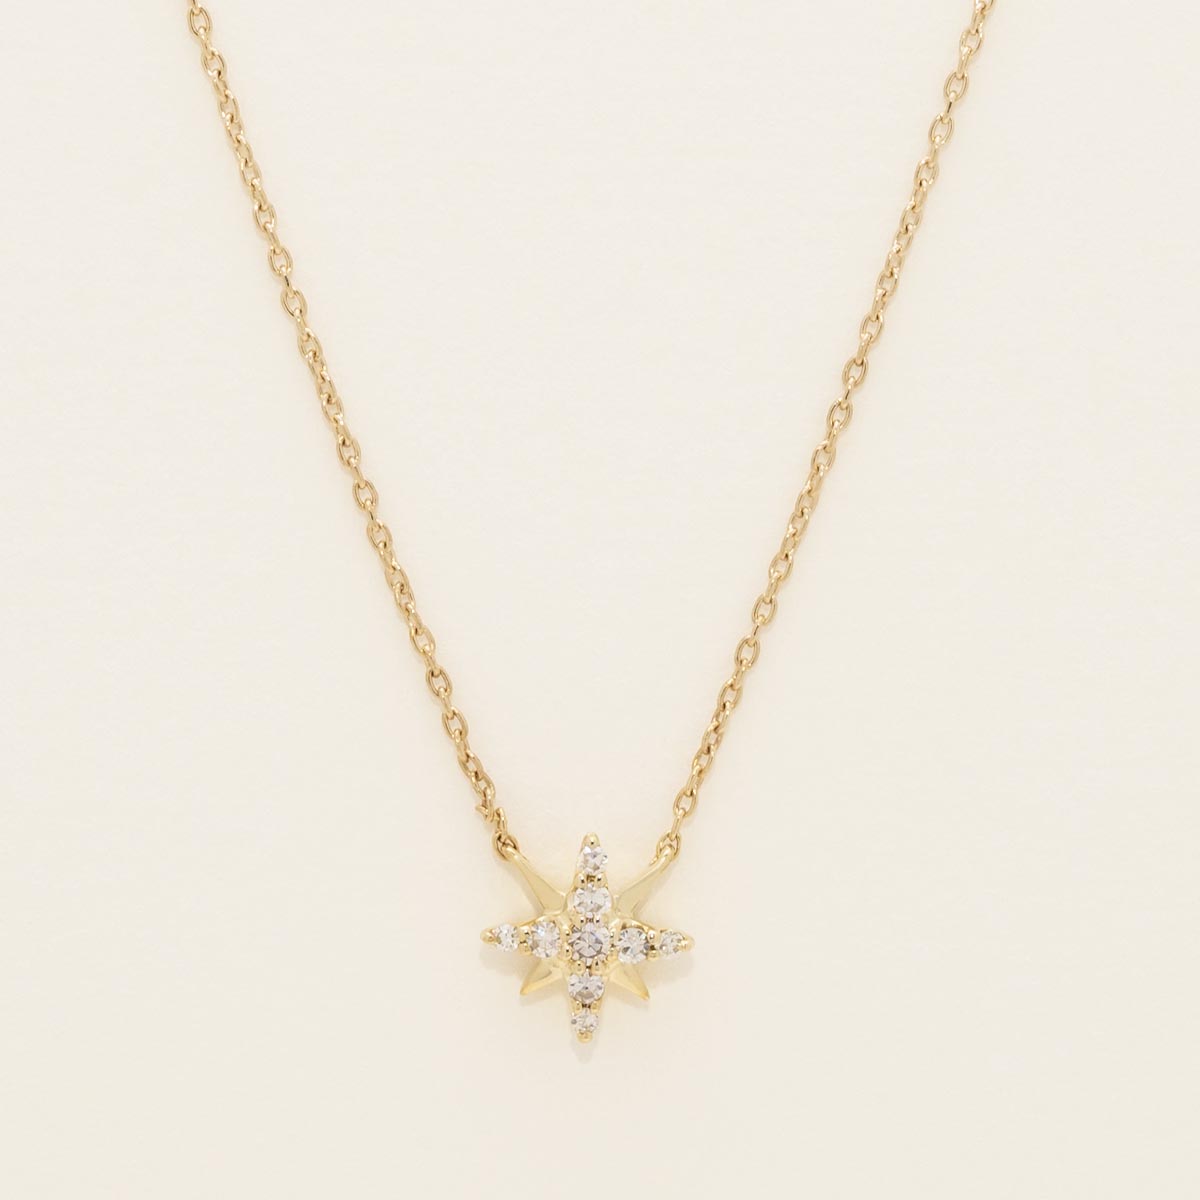 Diamond Petite Star Fashion Necklace in 10kt Yellow Gold (1/10ct tw)